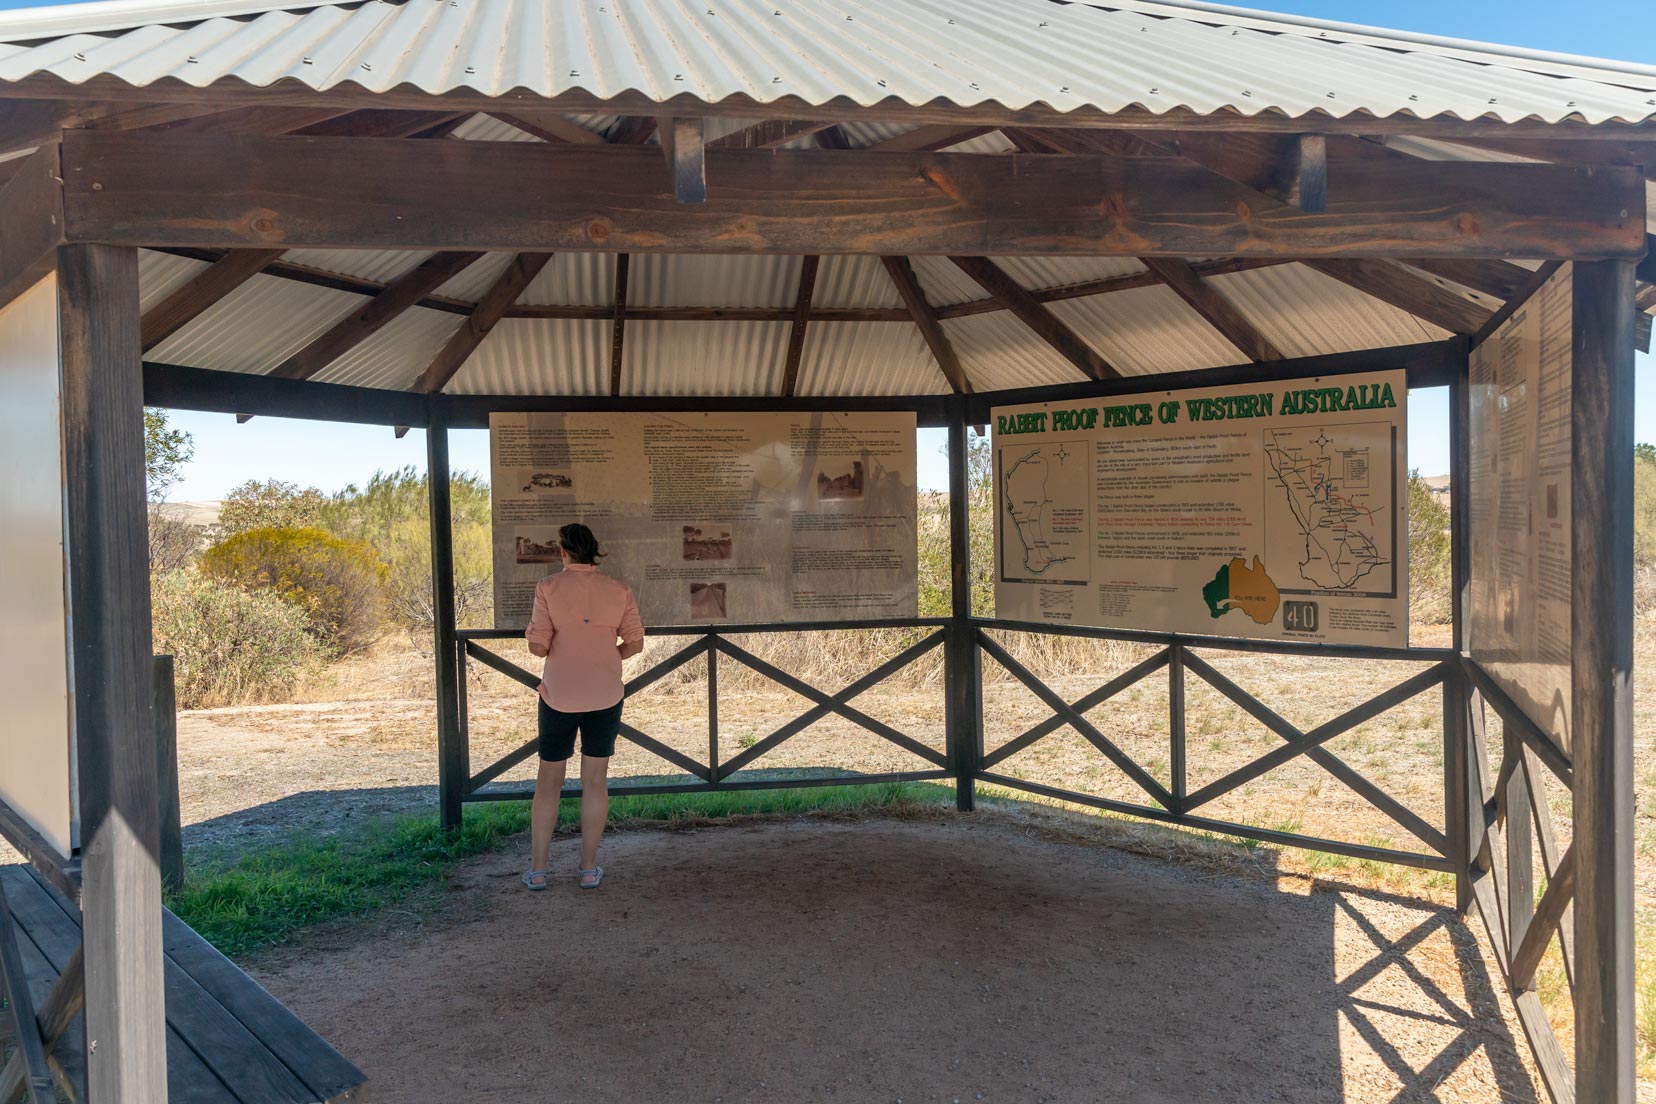 Shelley stood in the Rabbit-Proof-Fence-info-board and gazebo